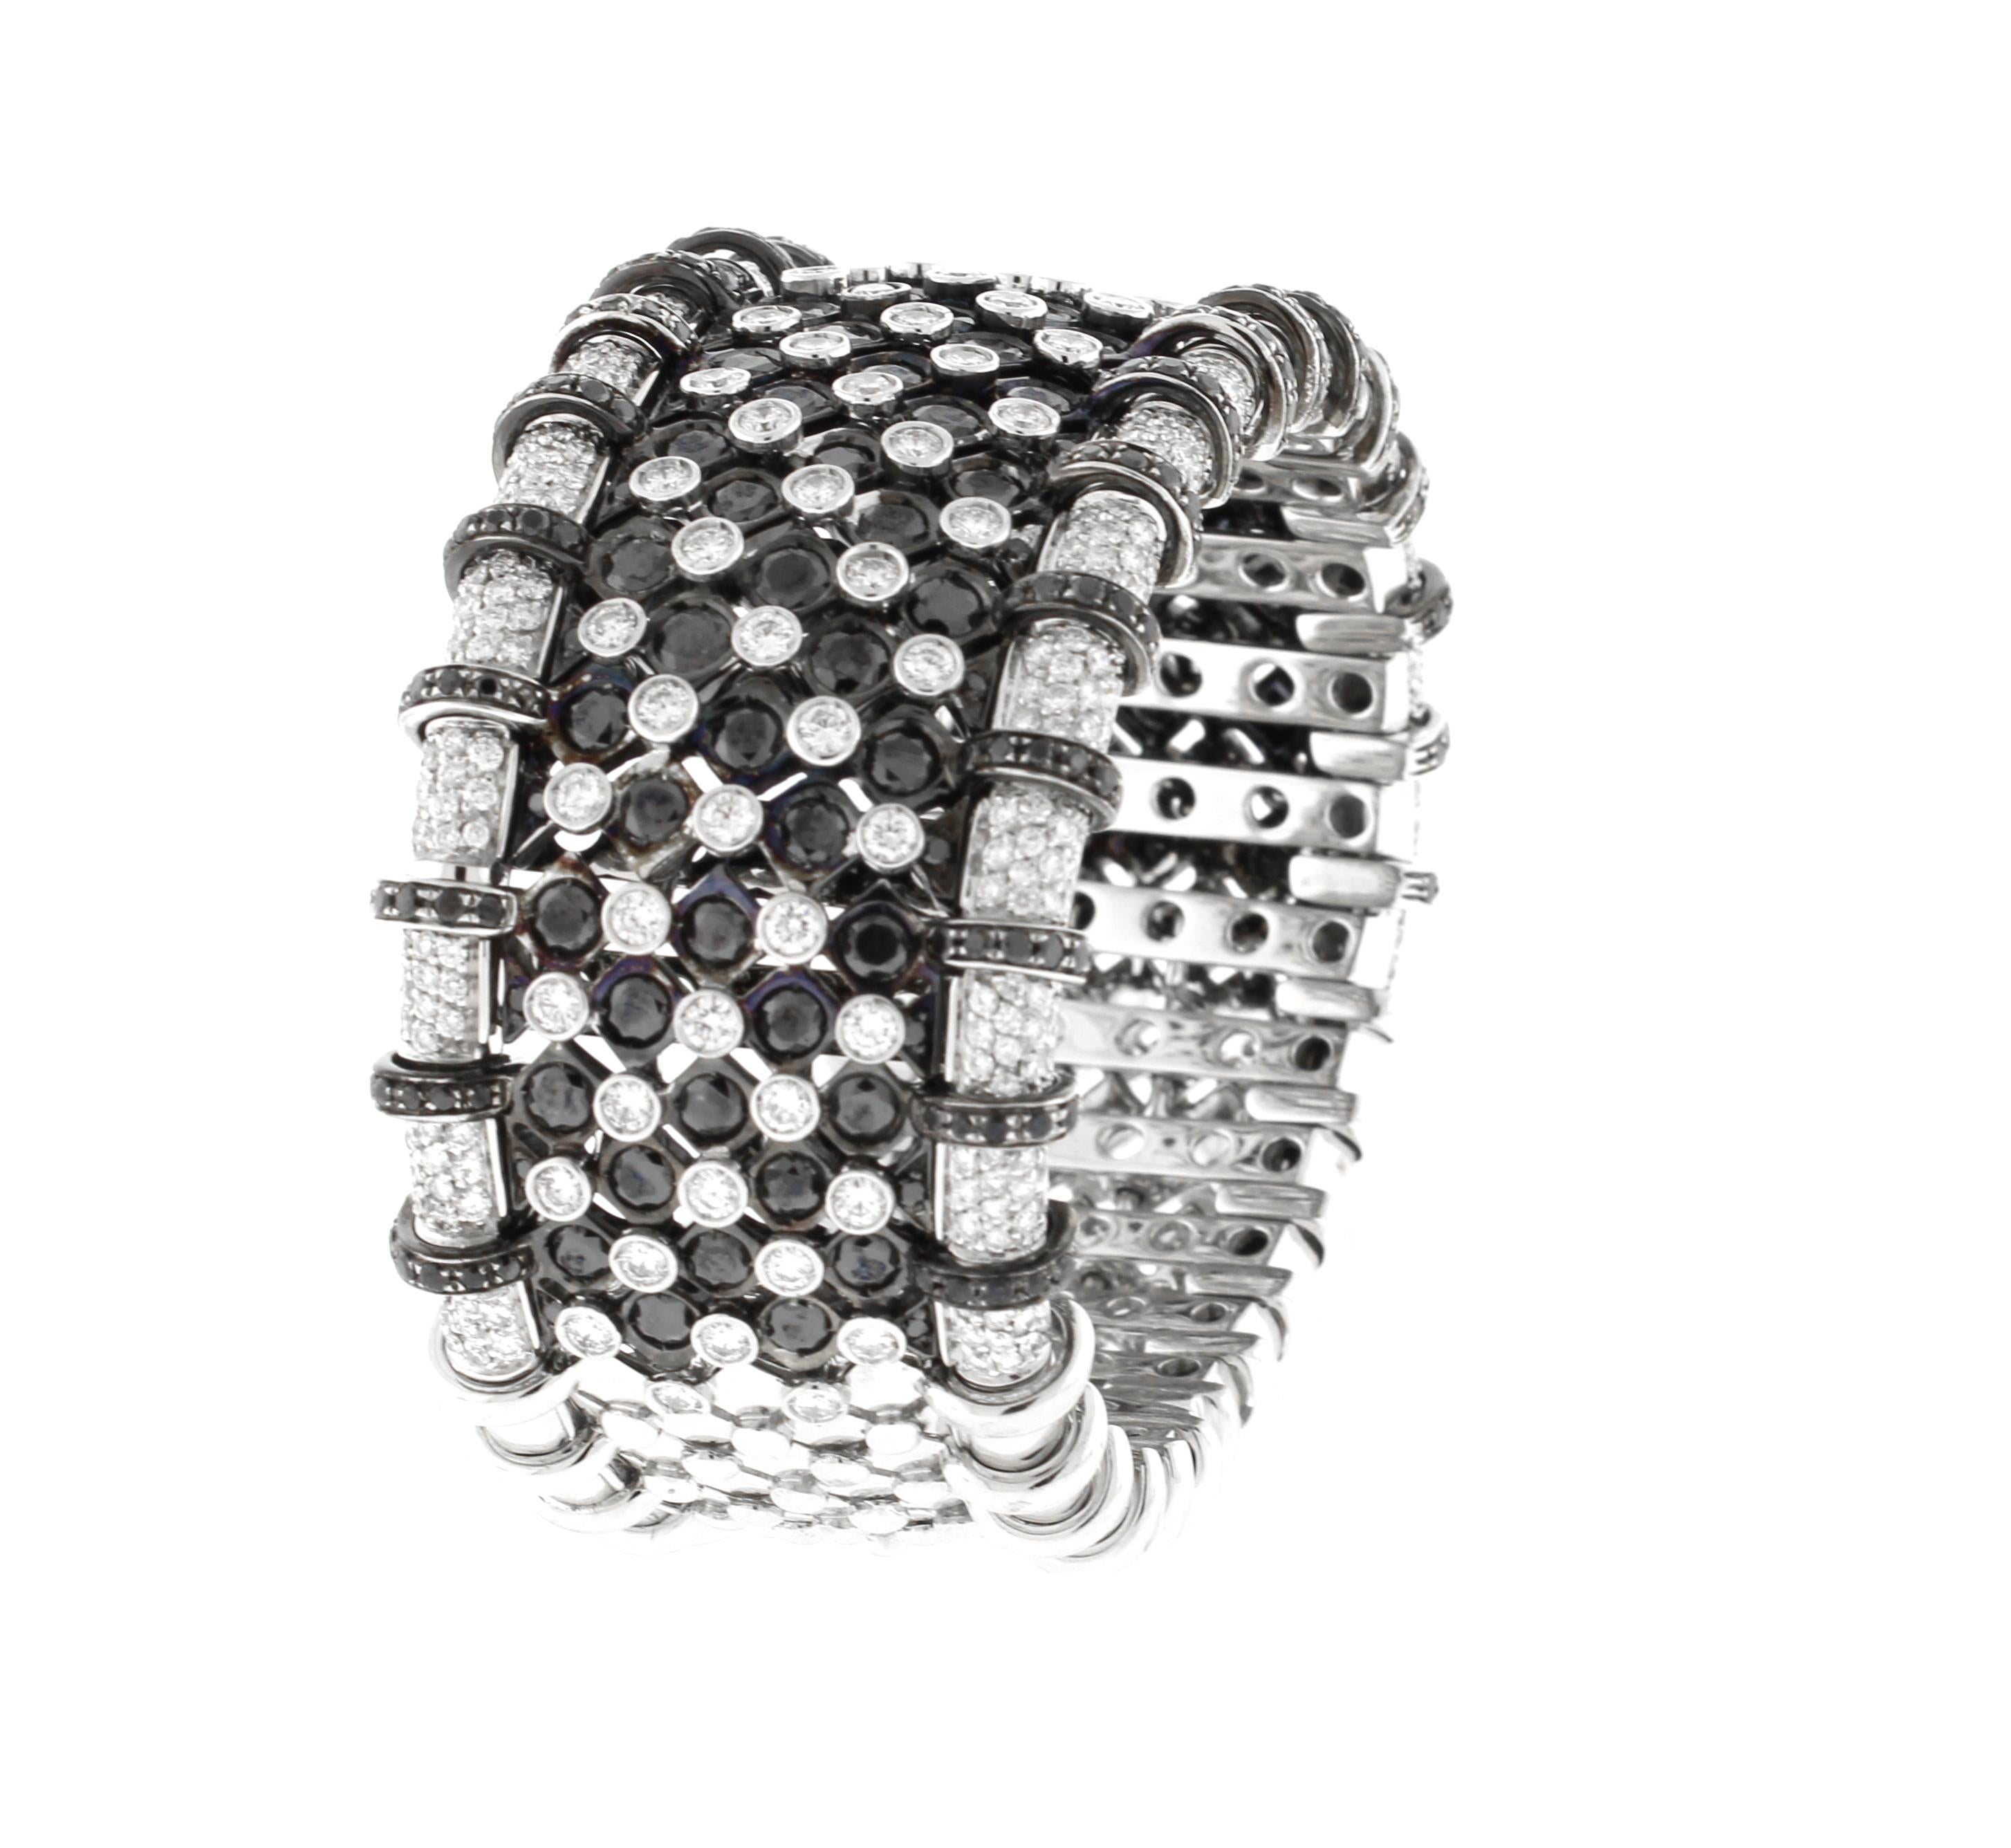 An absolutely stunning white and black diamond flexible cuff bracelet. The bangle was designed and crafted  in Valenza by master jewelers RCM Gioielli.  This outstanding bangle boasts over 9.5 carats of stunning white diamonds and 9 carats of